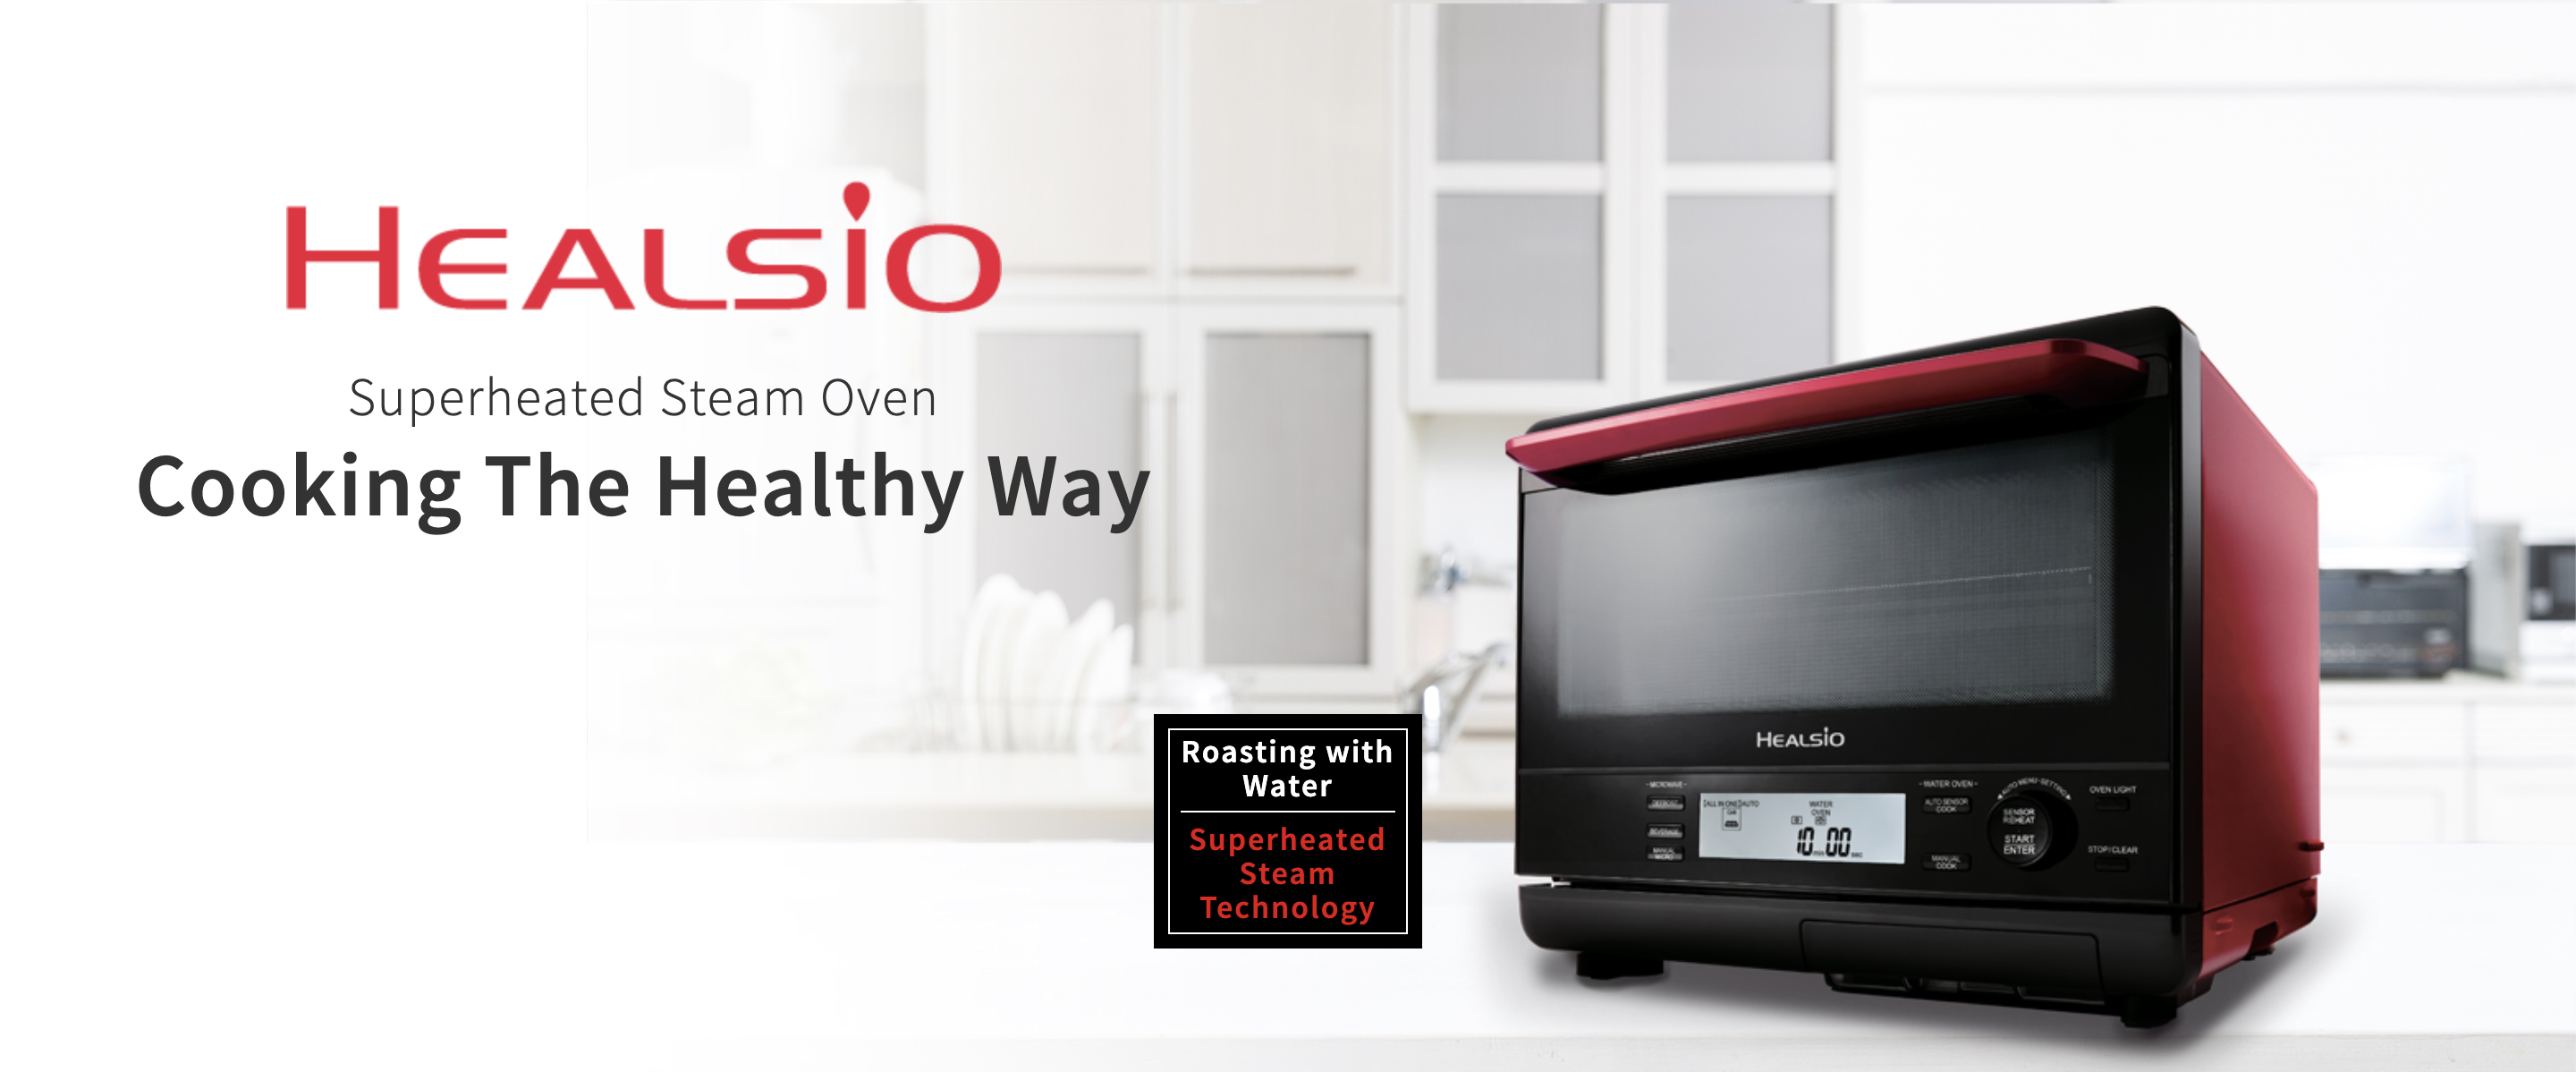 Top 5 Best Microwave Ovens in Singapore